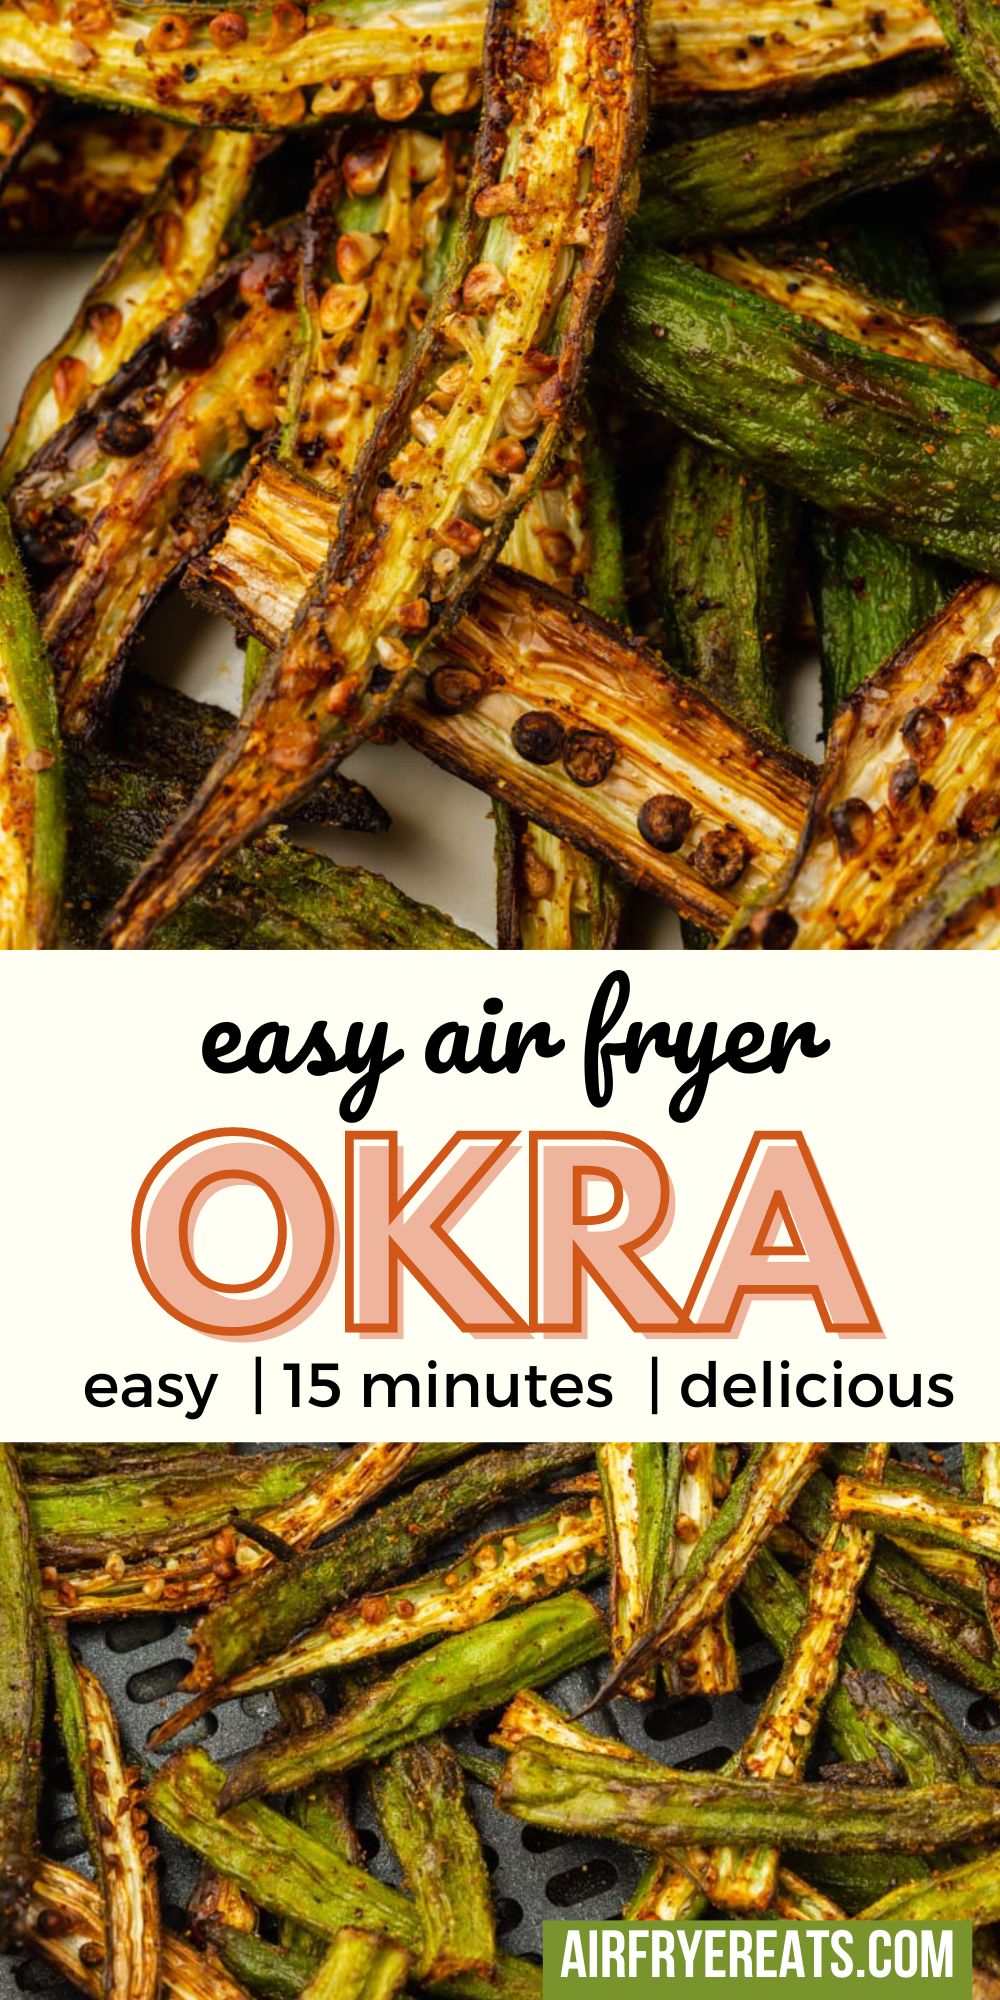 Tasty, simply seasoned fresh okra is extra crispy when you make it in the air fryer! This recipe for Air Fryer Okra will be your new favorite way to cook okra, guaranteed. via @vegetarianmamma